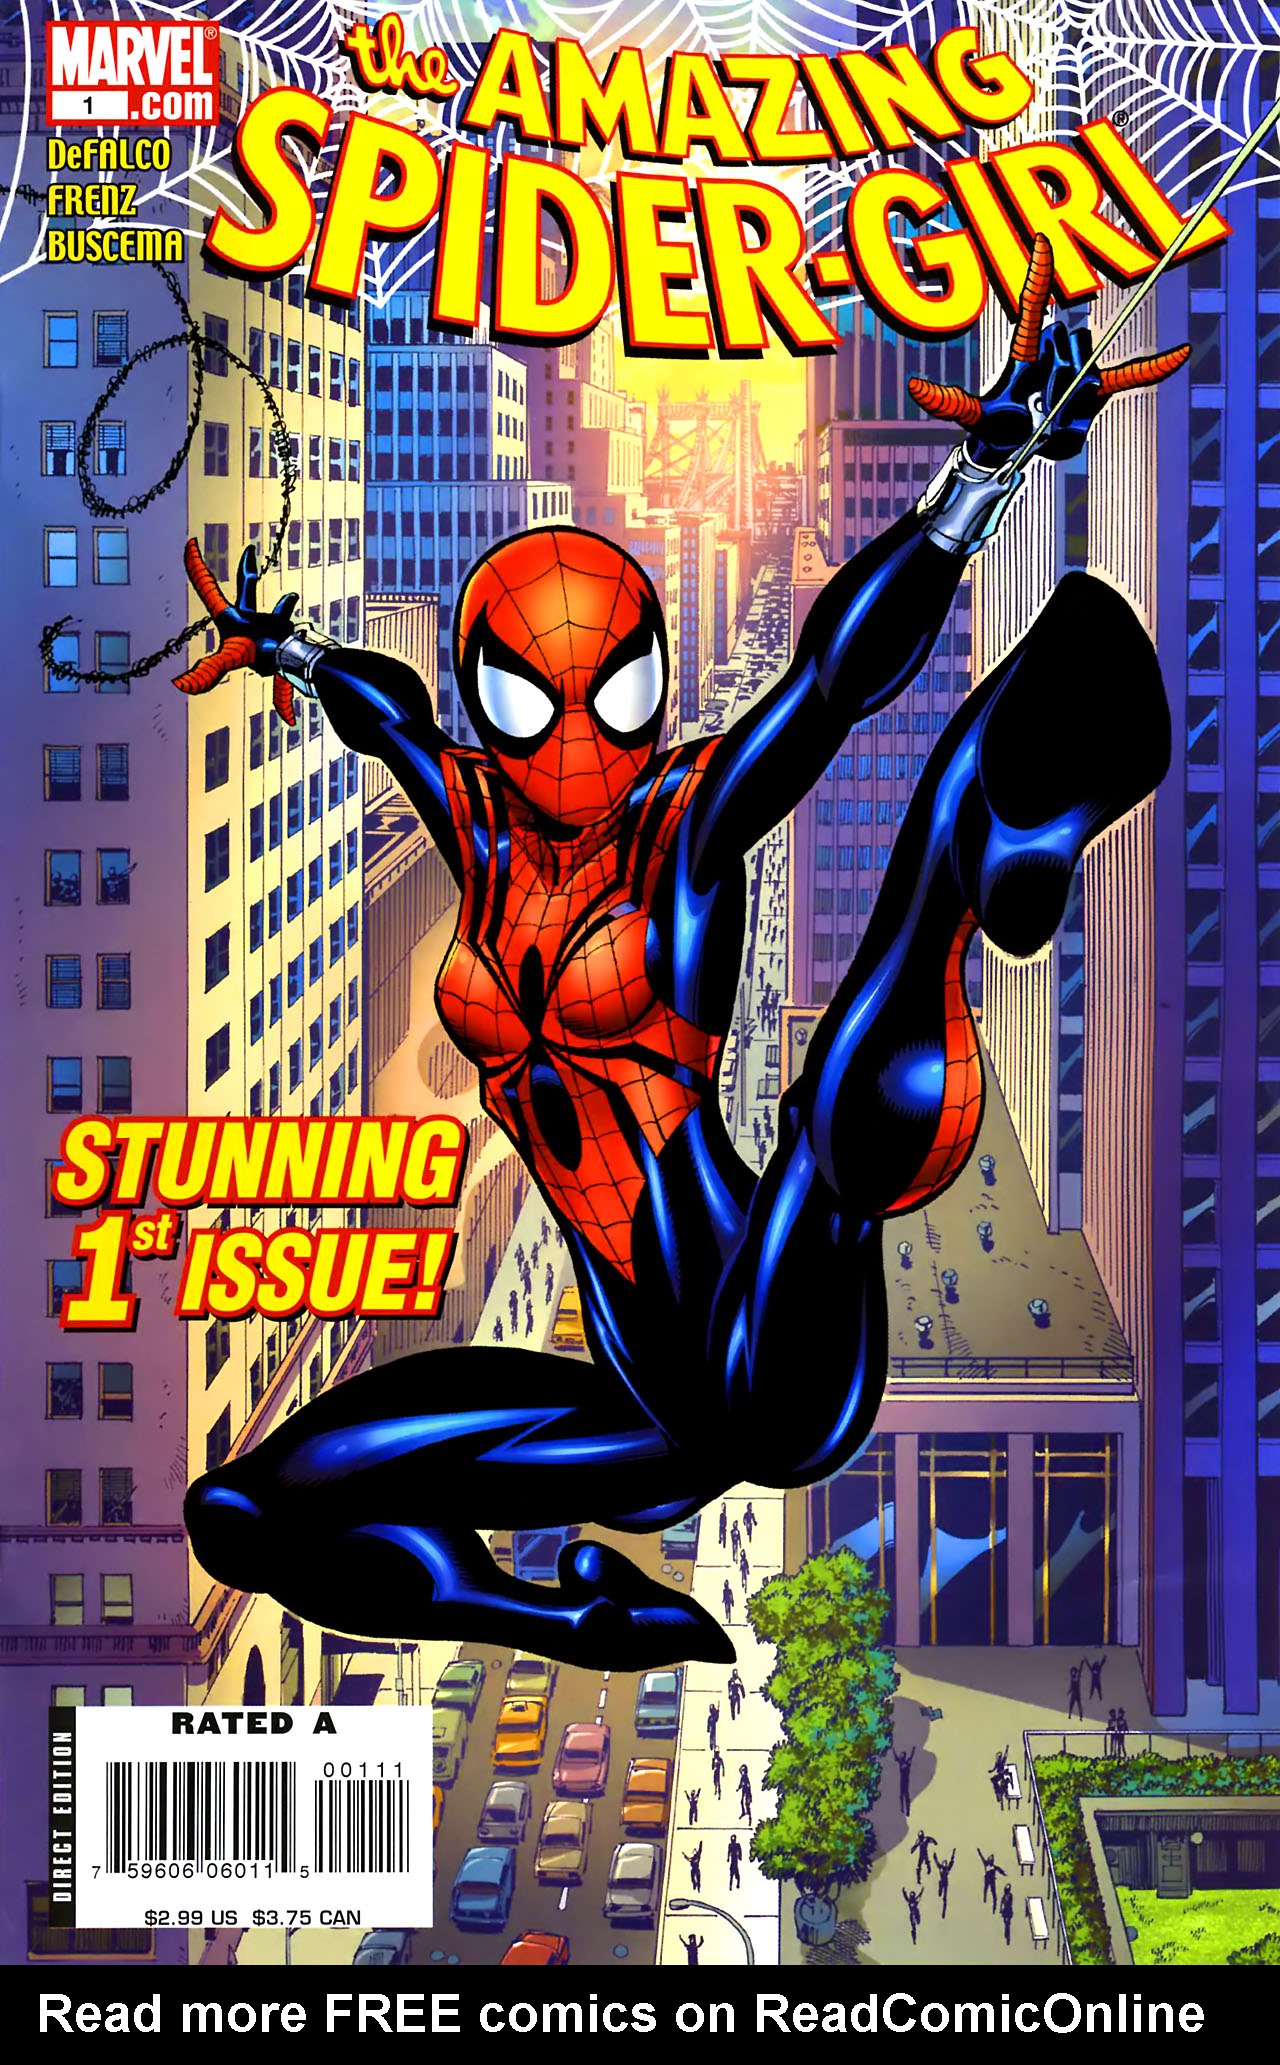 Read online Amazing Spider-Girl comic -  Issue #1 - 1